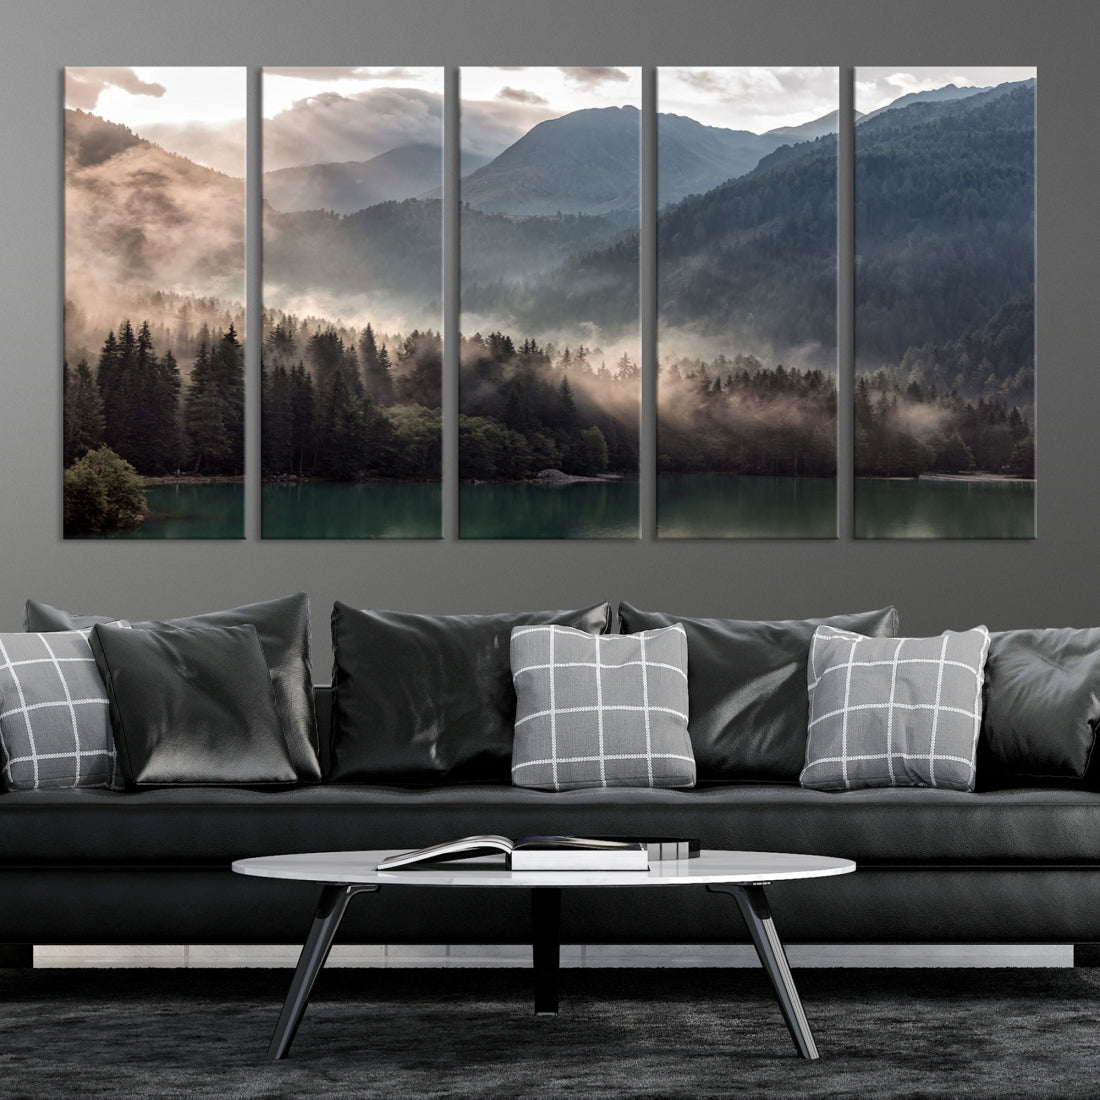 Green Foggy Forest Wall Art Mountain Landscape Canvas Print Living Room Wall Decor